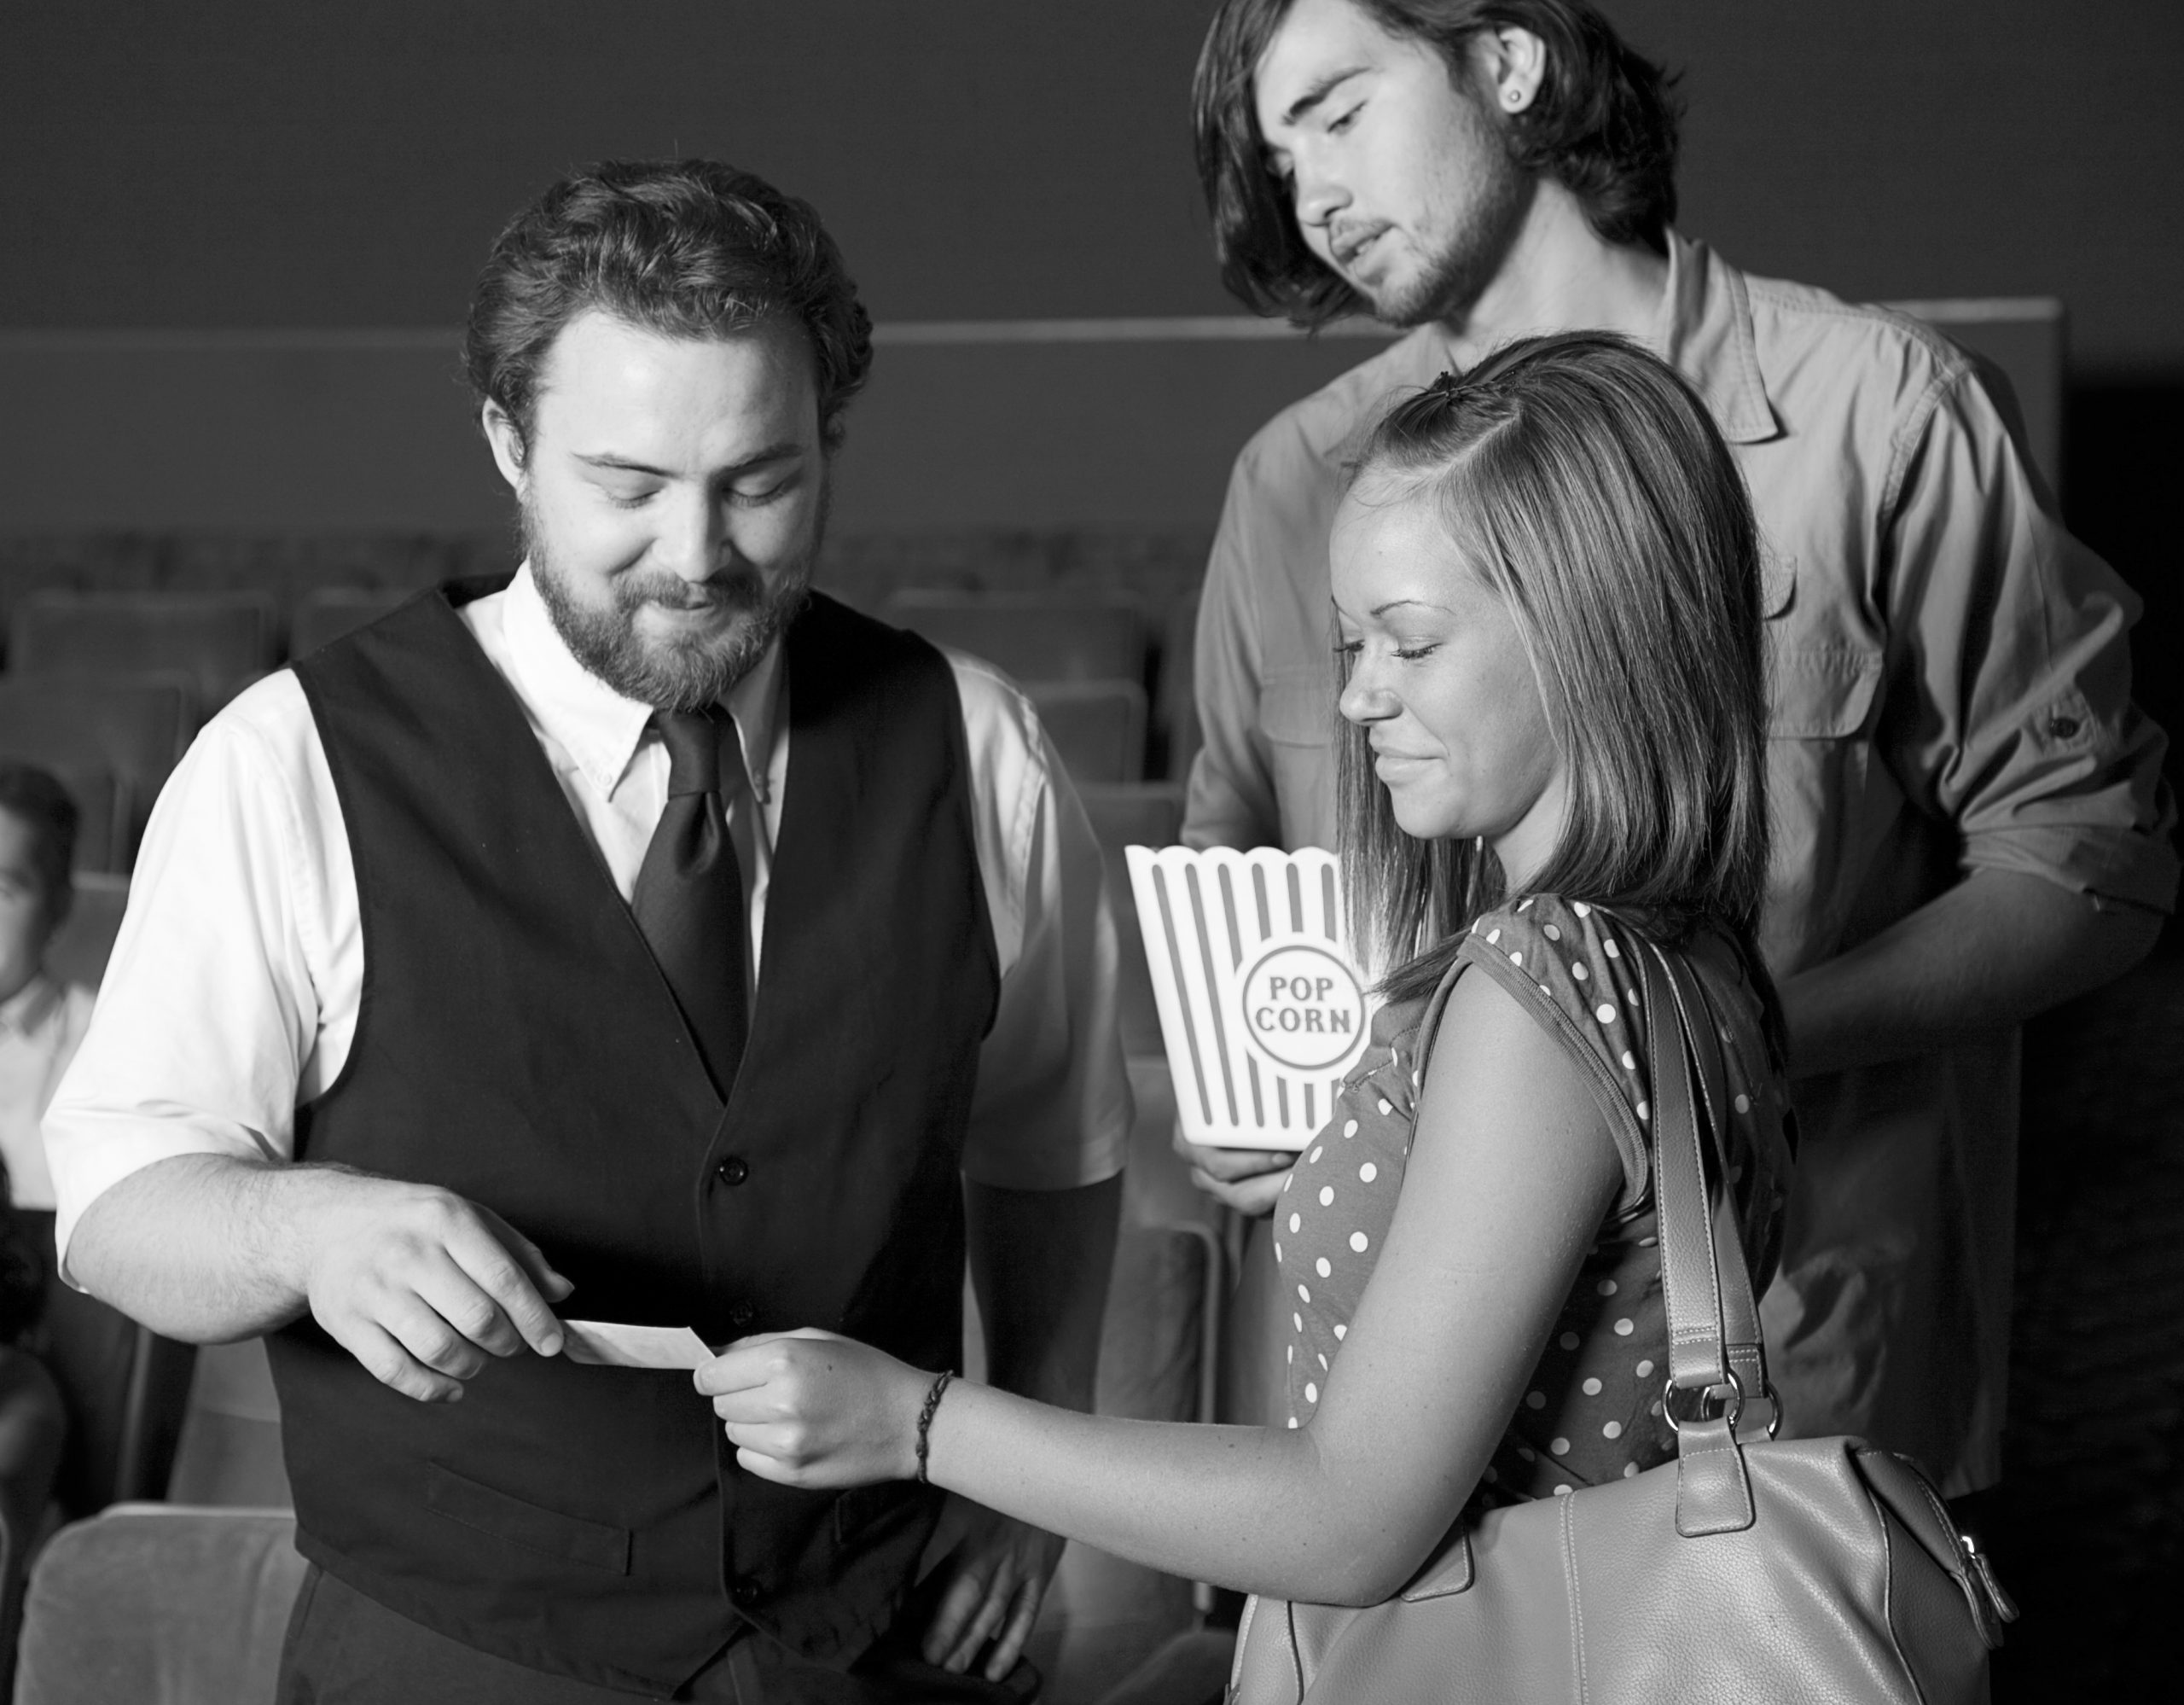 A young couple with an usher in a movie theater.